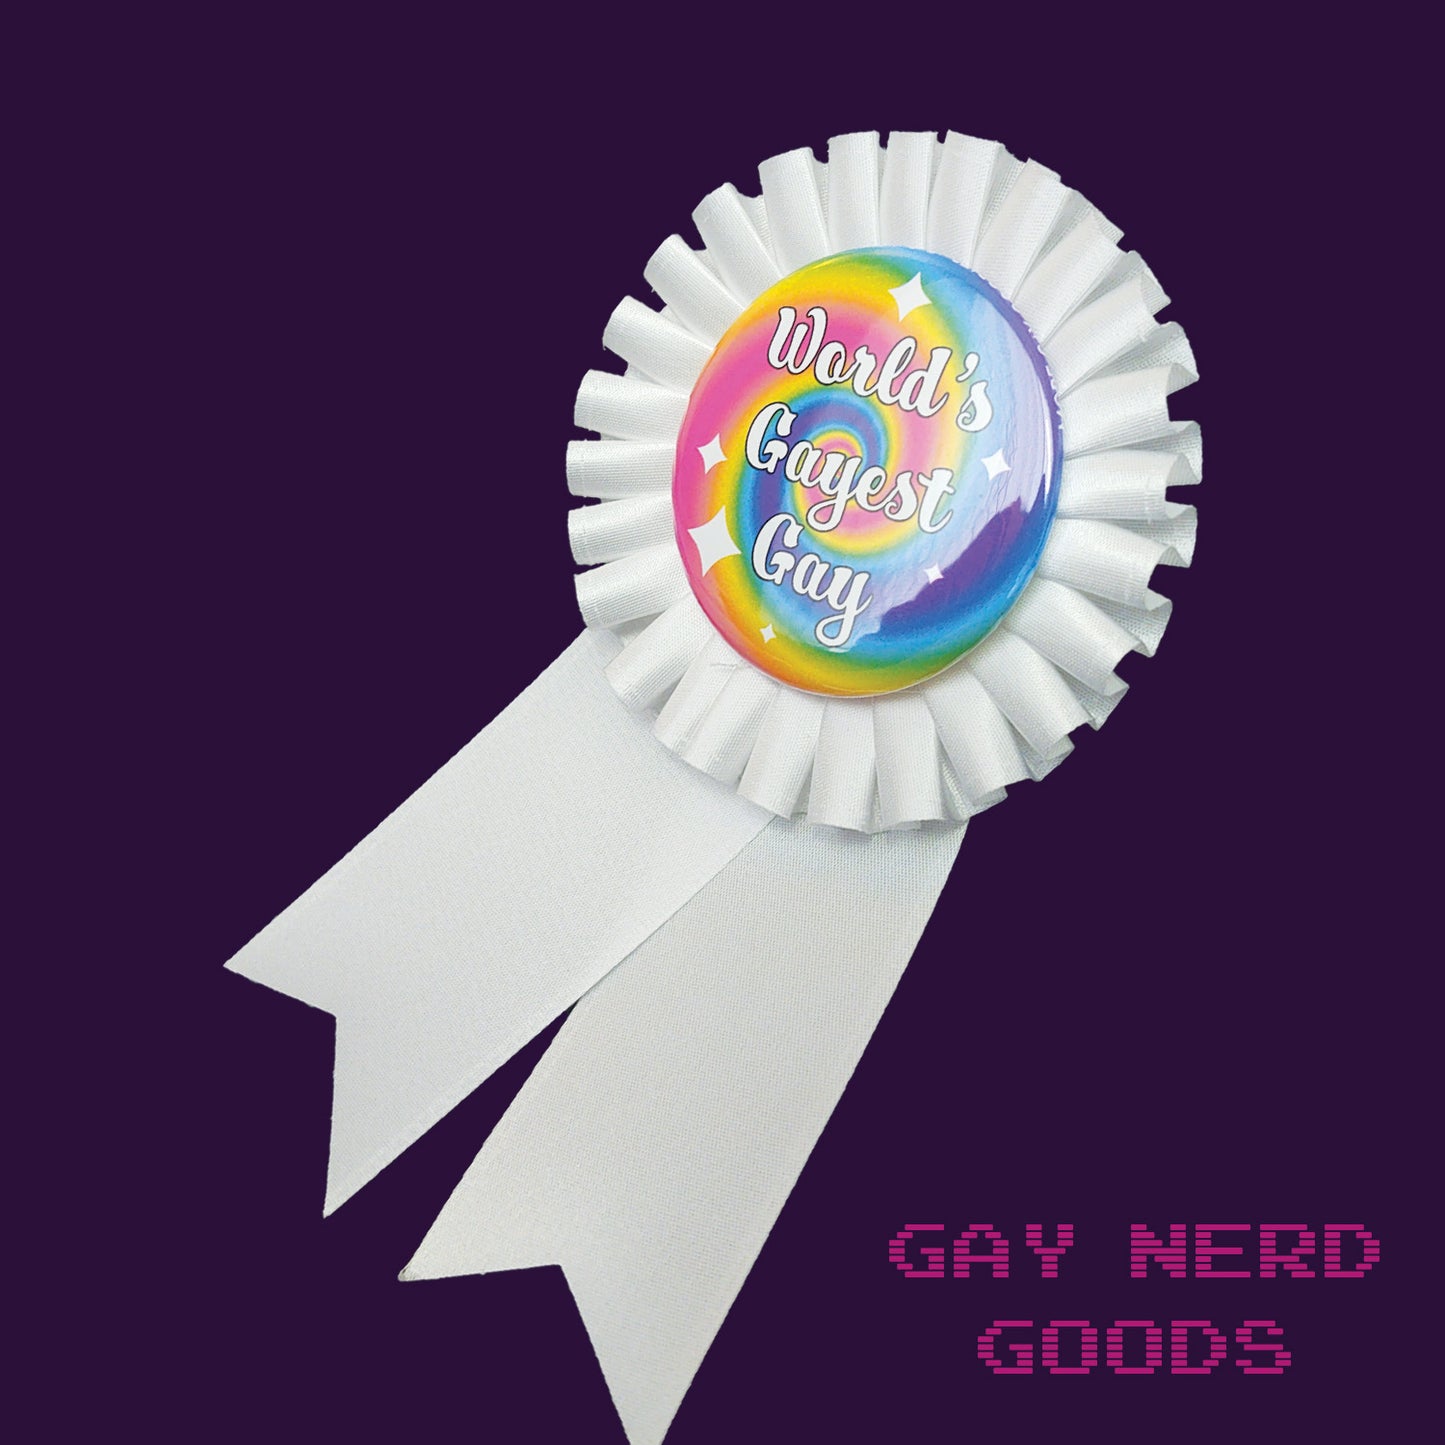 side angle view of the white world's gayest gay award ribbon on a dark purple background